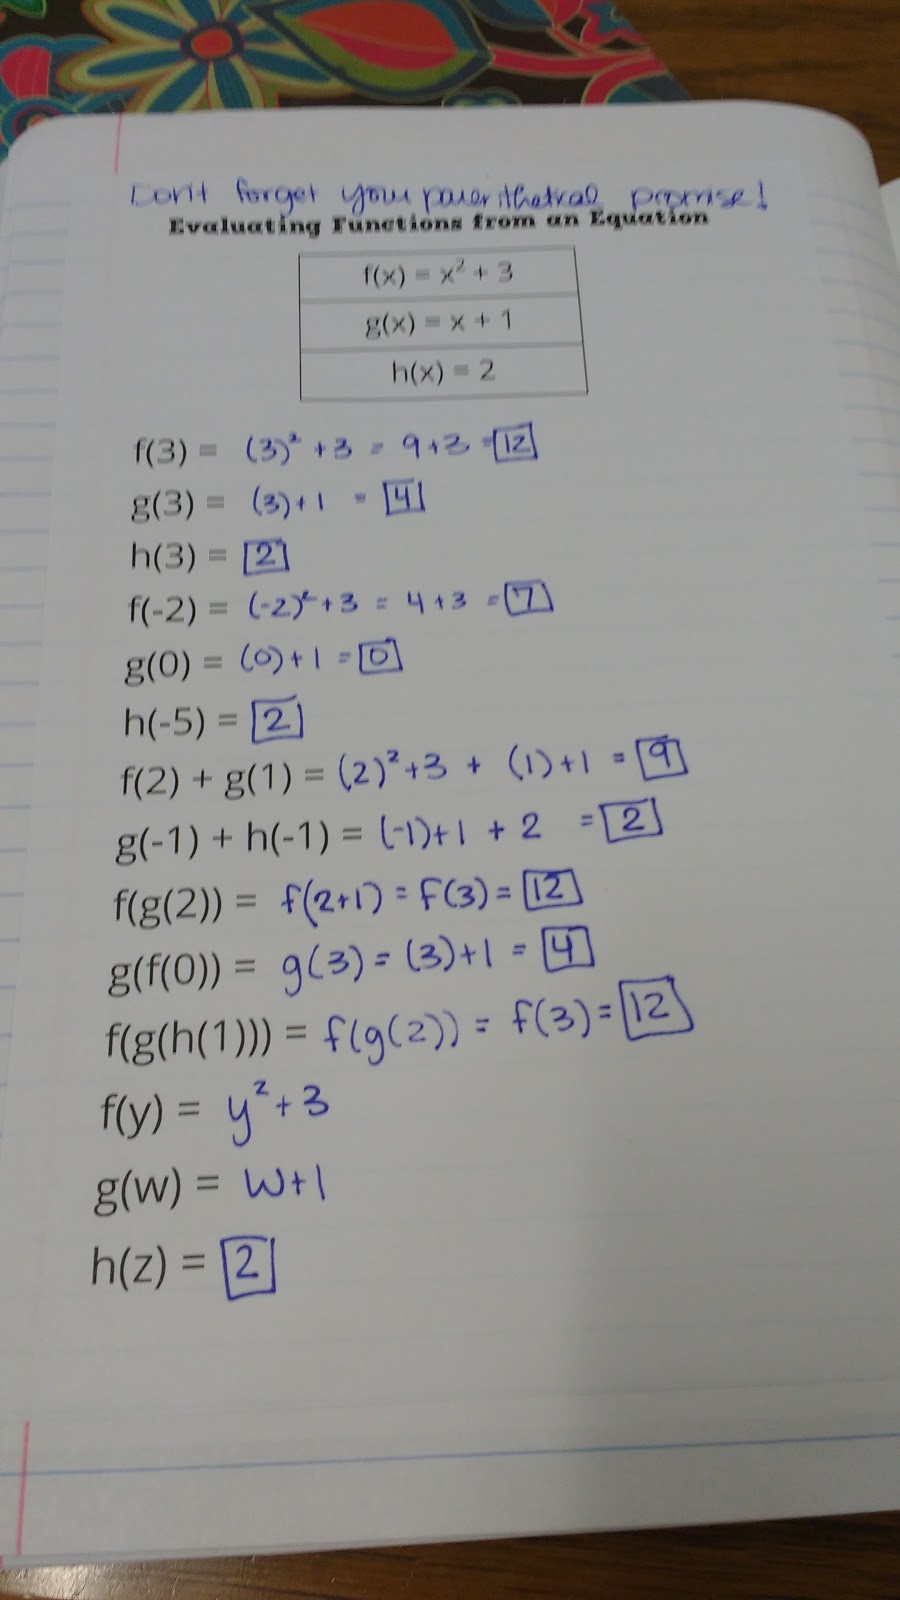 Evaluating Functions from an Equation Notes